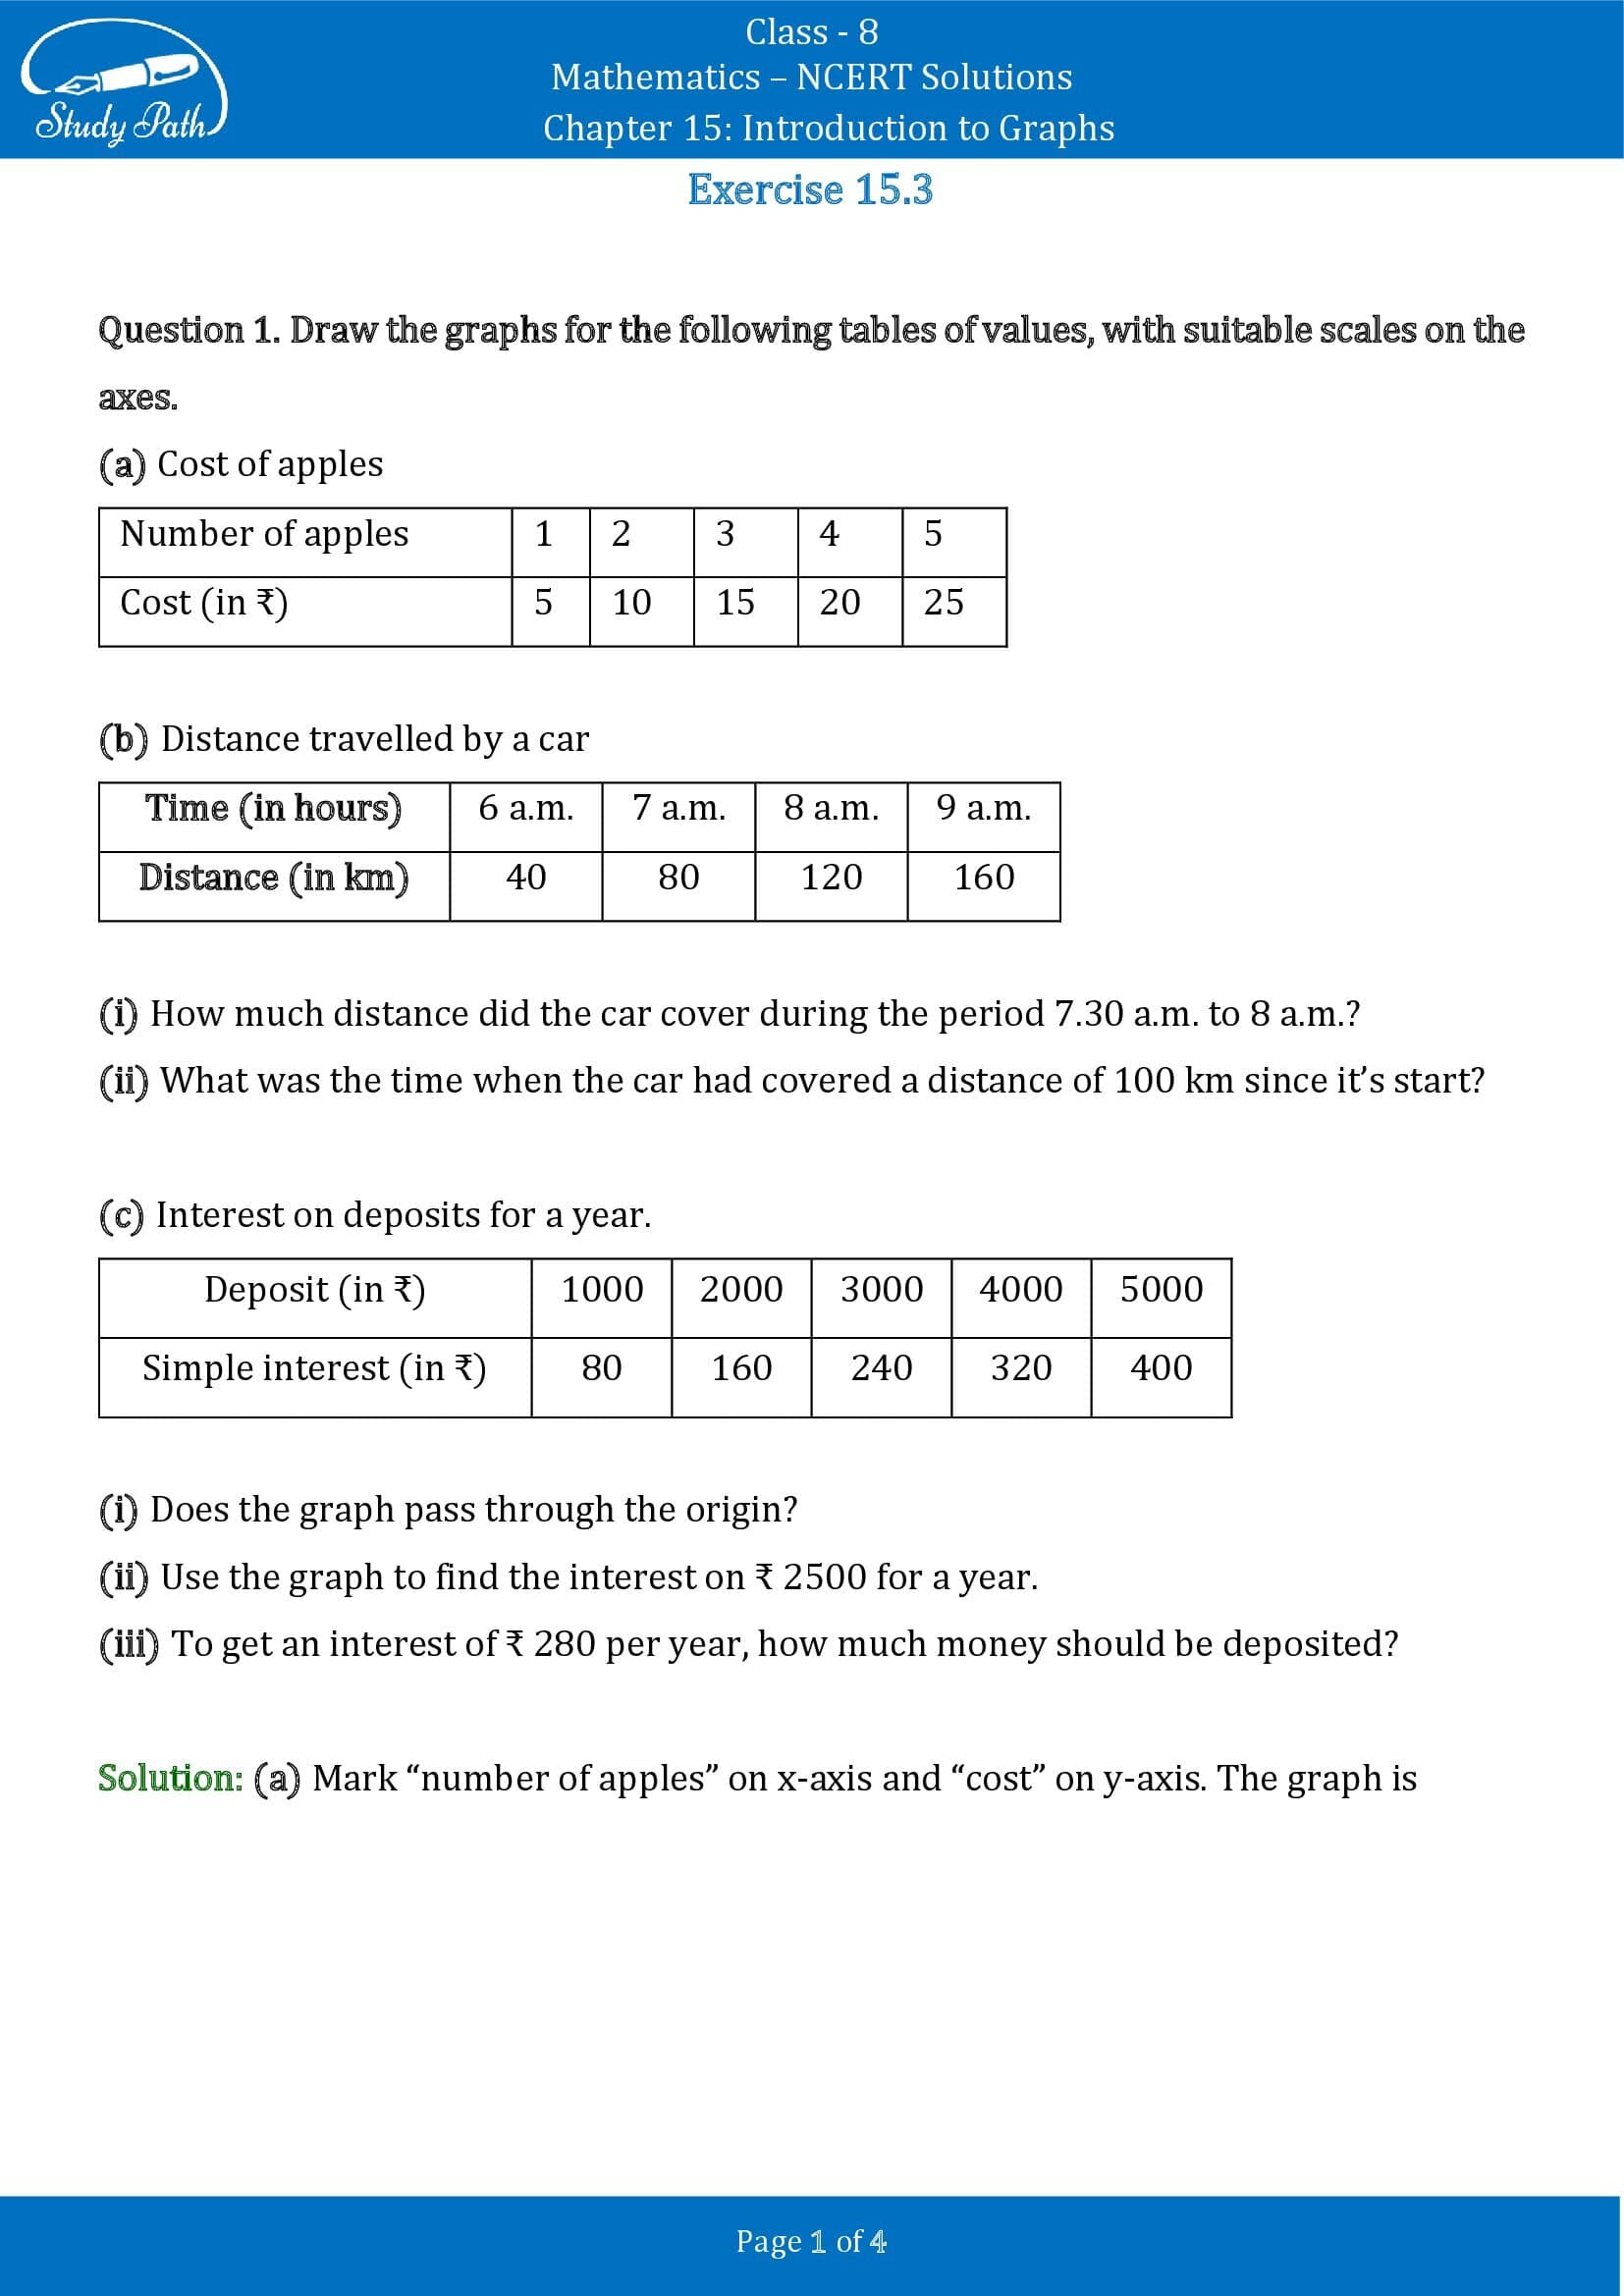 NCERT Solutions for Class 8 Maths Chapter 15 Introduction to Graphs Exercise 15.3 00001